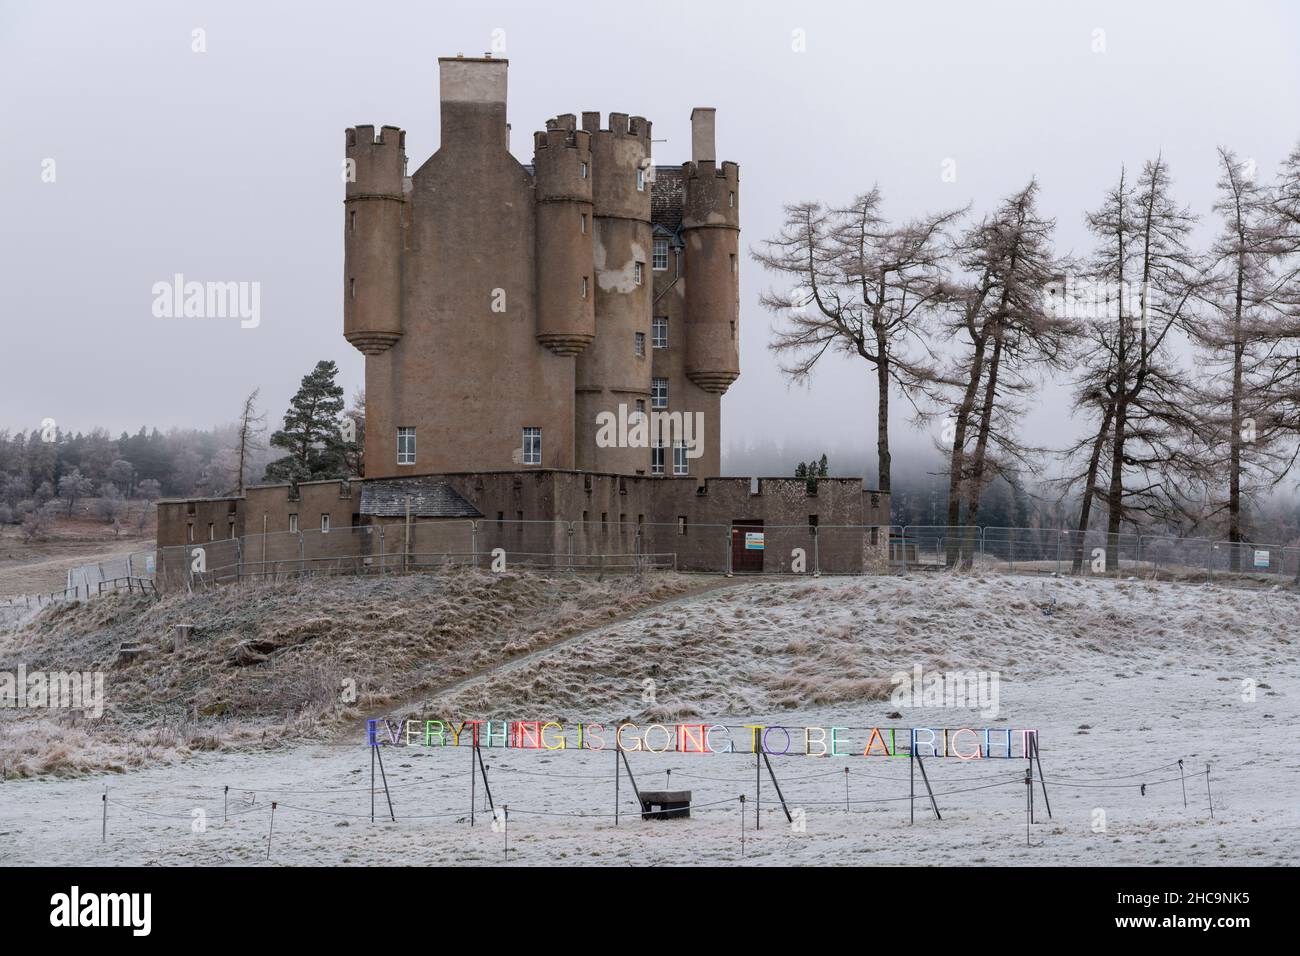 The Colourful Neon Artwork at Braemar Castle Provides a Reassuring and Uplifting Message in an Austere Setting on a Cold Winter Morning Stock Photo